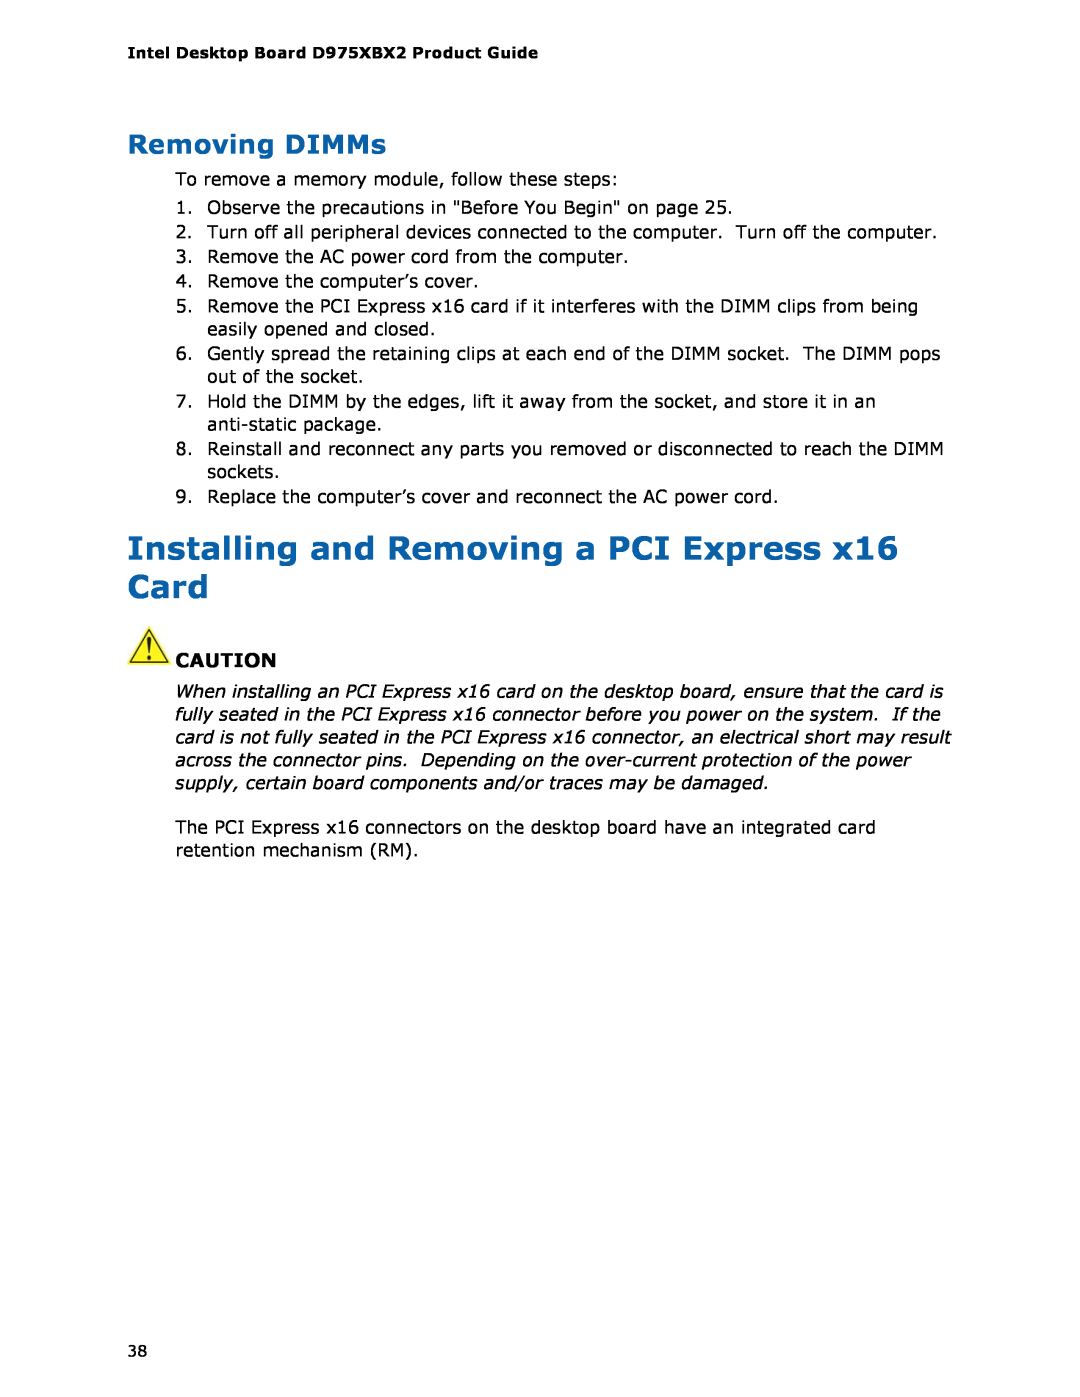 Intel D975XBX2 manual Installing and Removing a PCI Express x16 Card, Removing DIMMs 